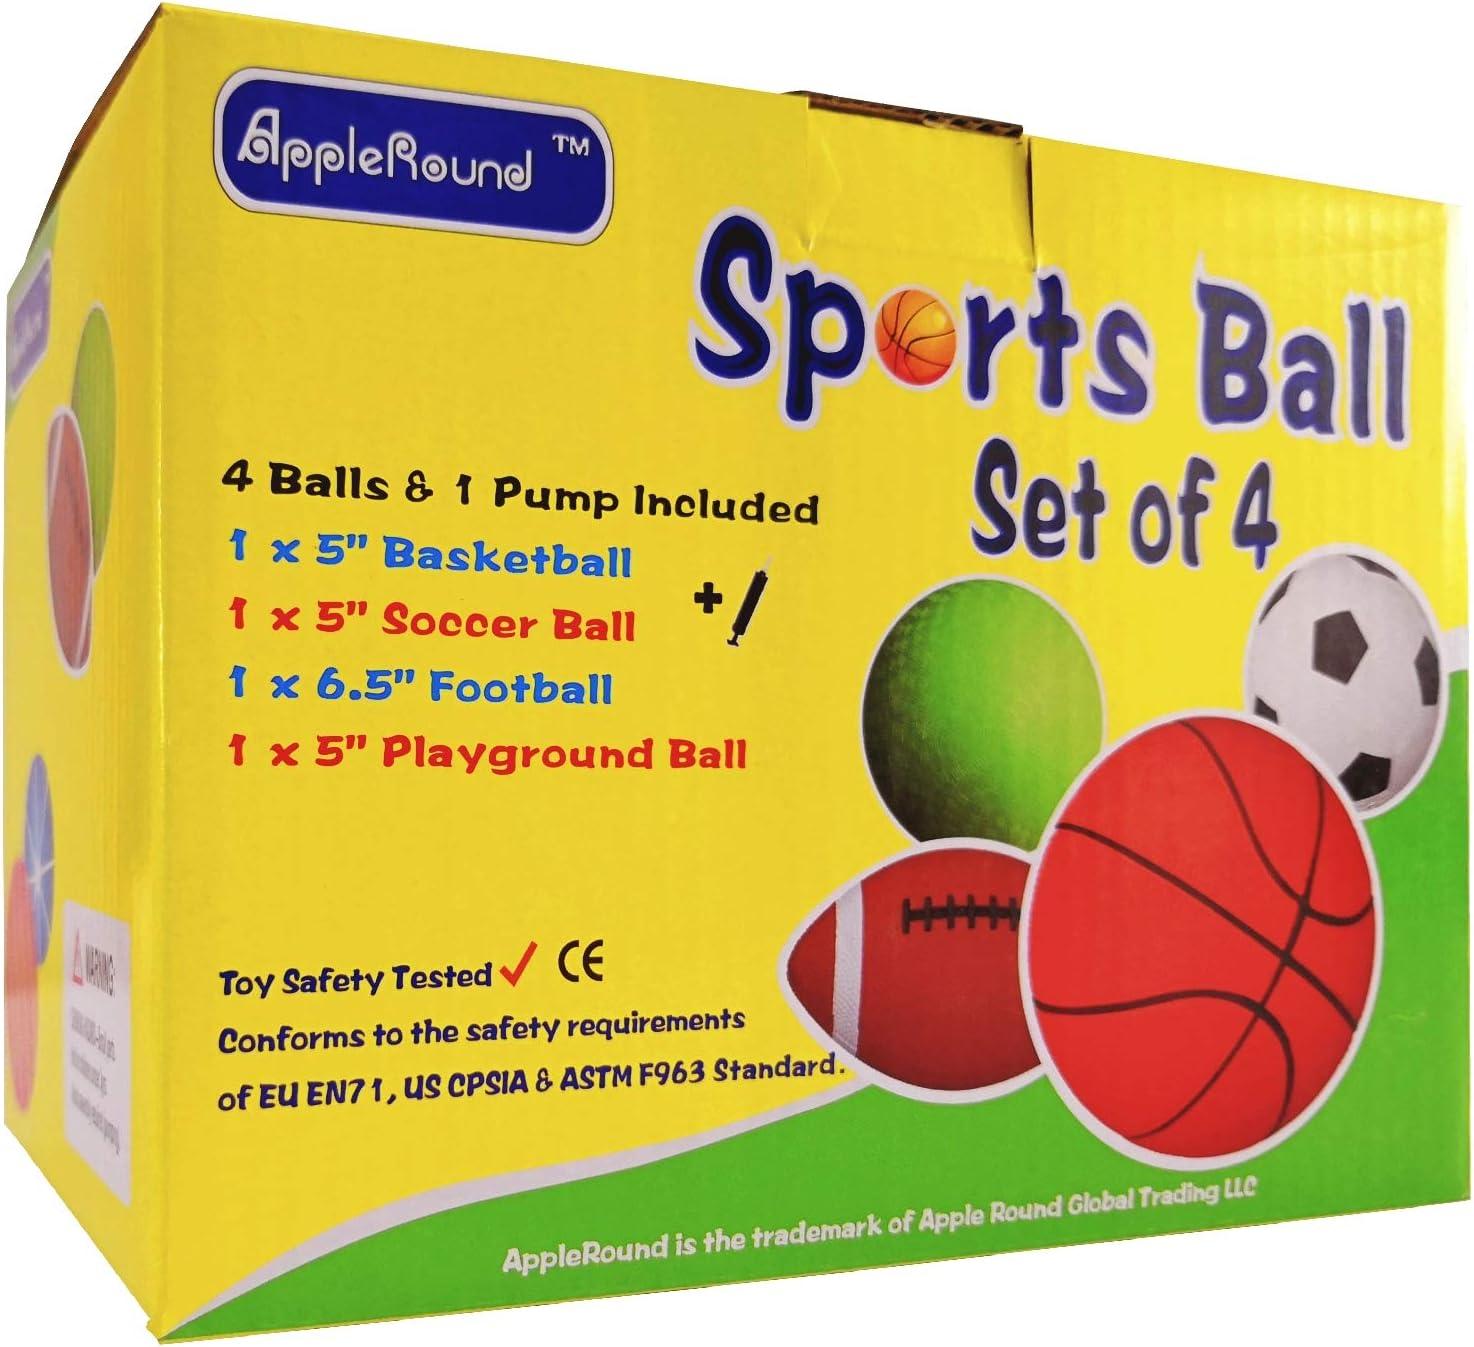 AppleRound Pack of 4 Sports Balls with 1 Pump: 1 Each of 5 Soccer